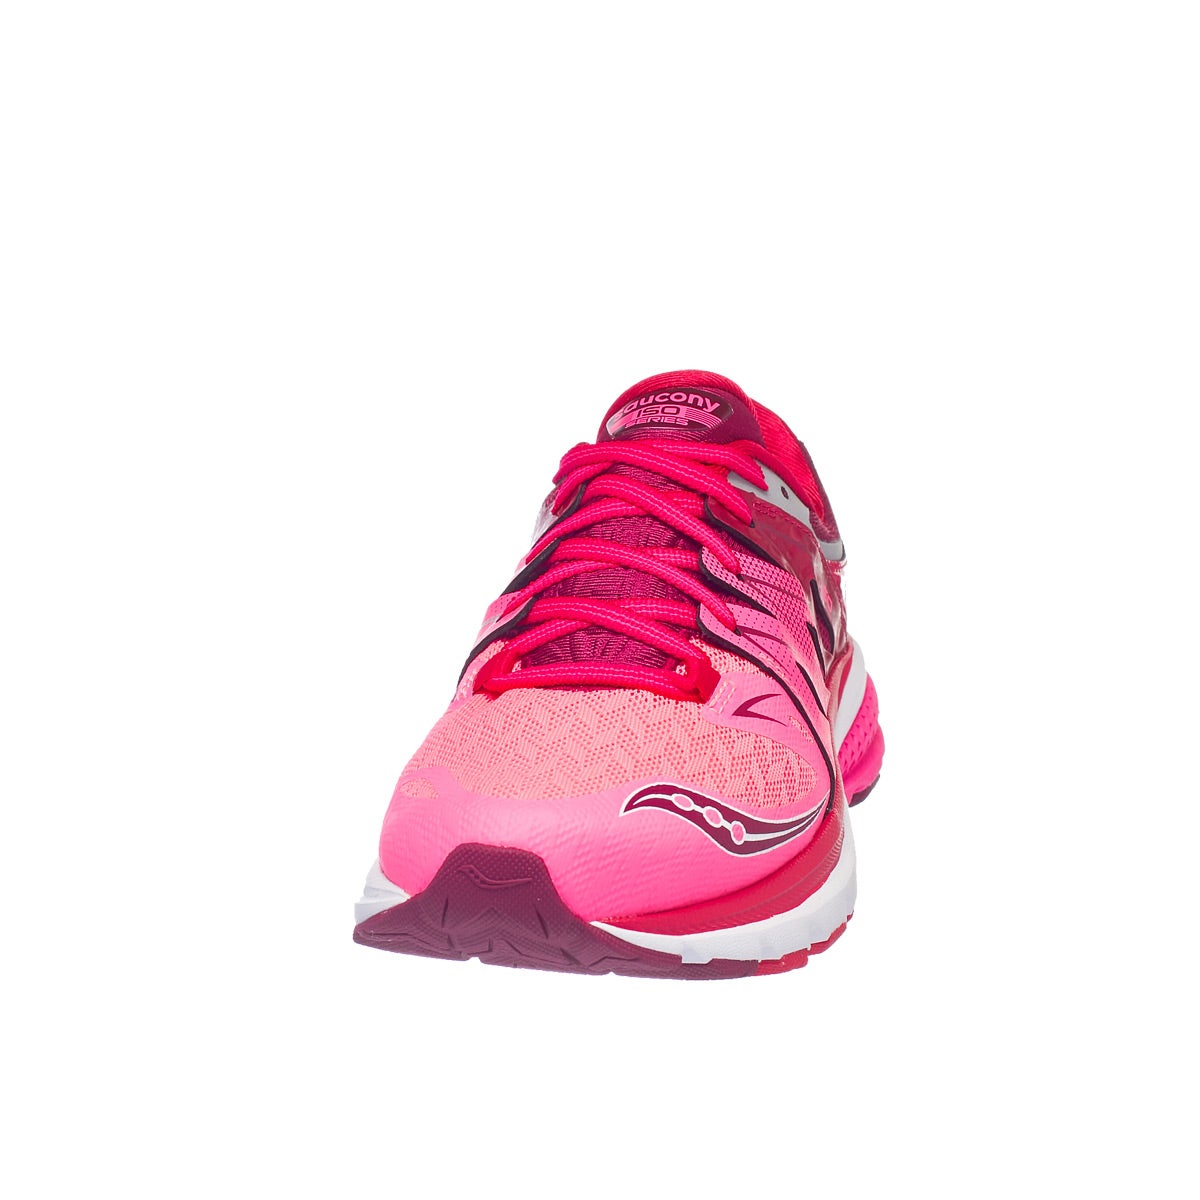 saucony shoes pink